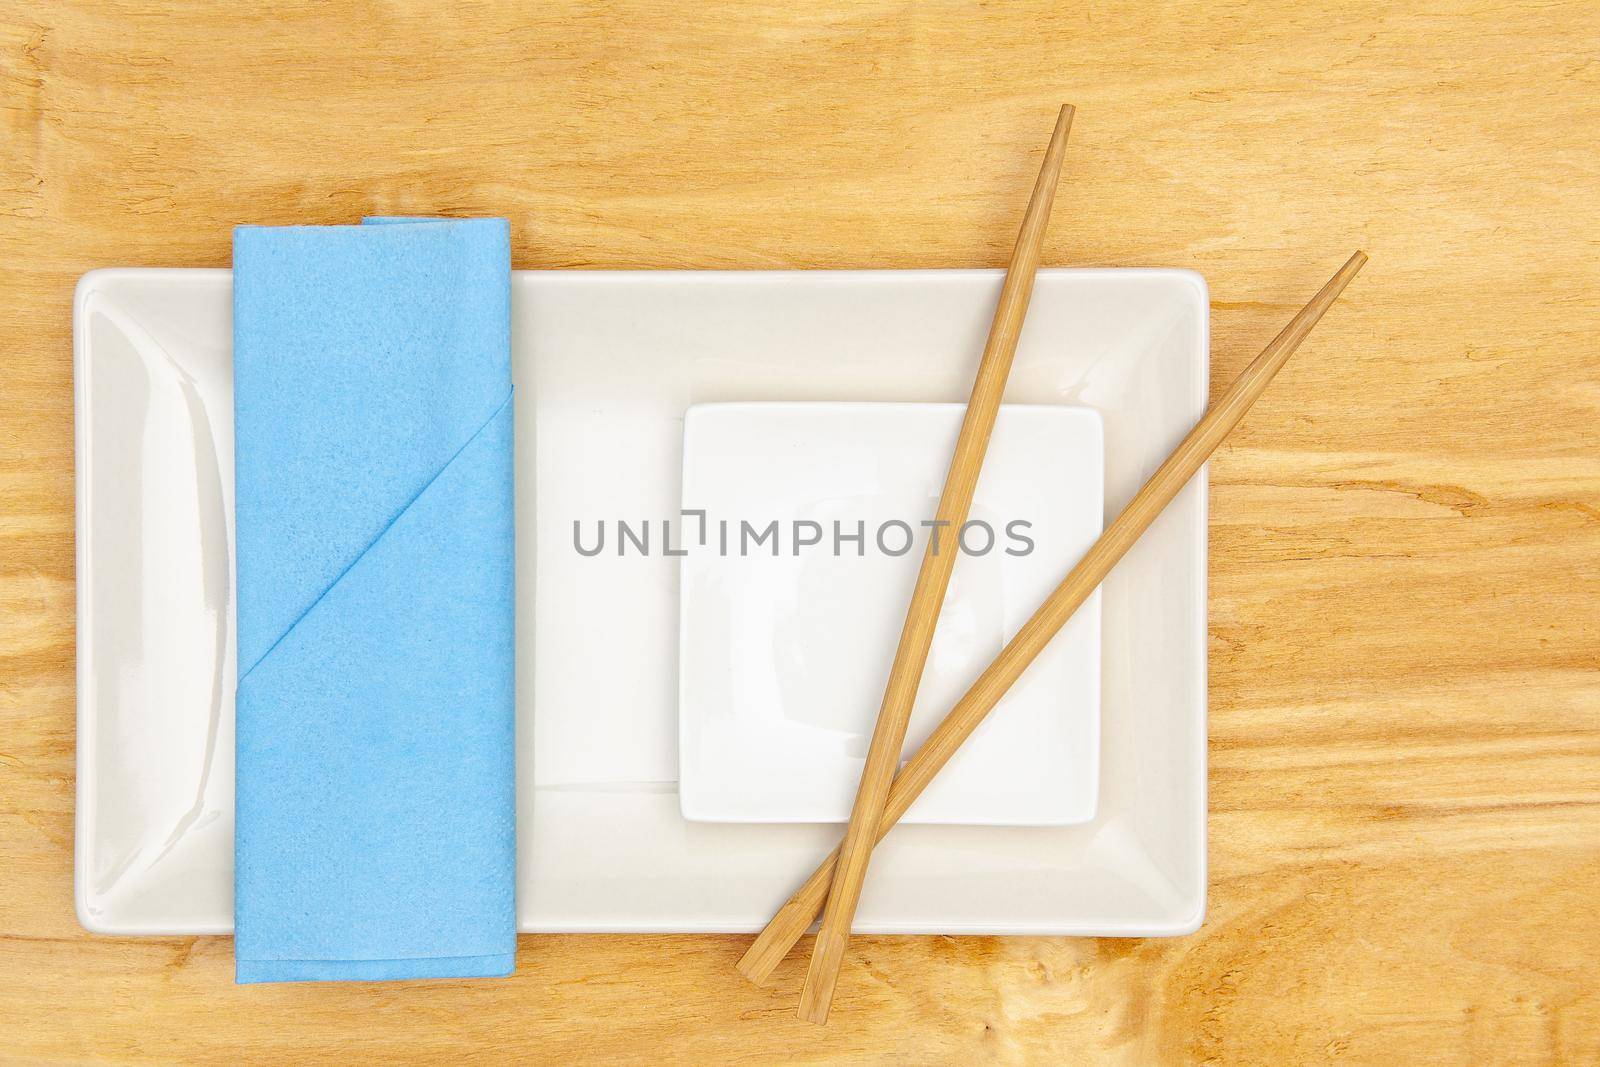 Ceramic bowls  and bamboo chopsticks for sushi food with blue napkin.